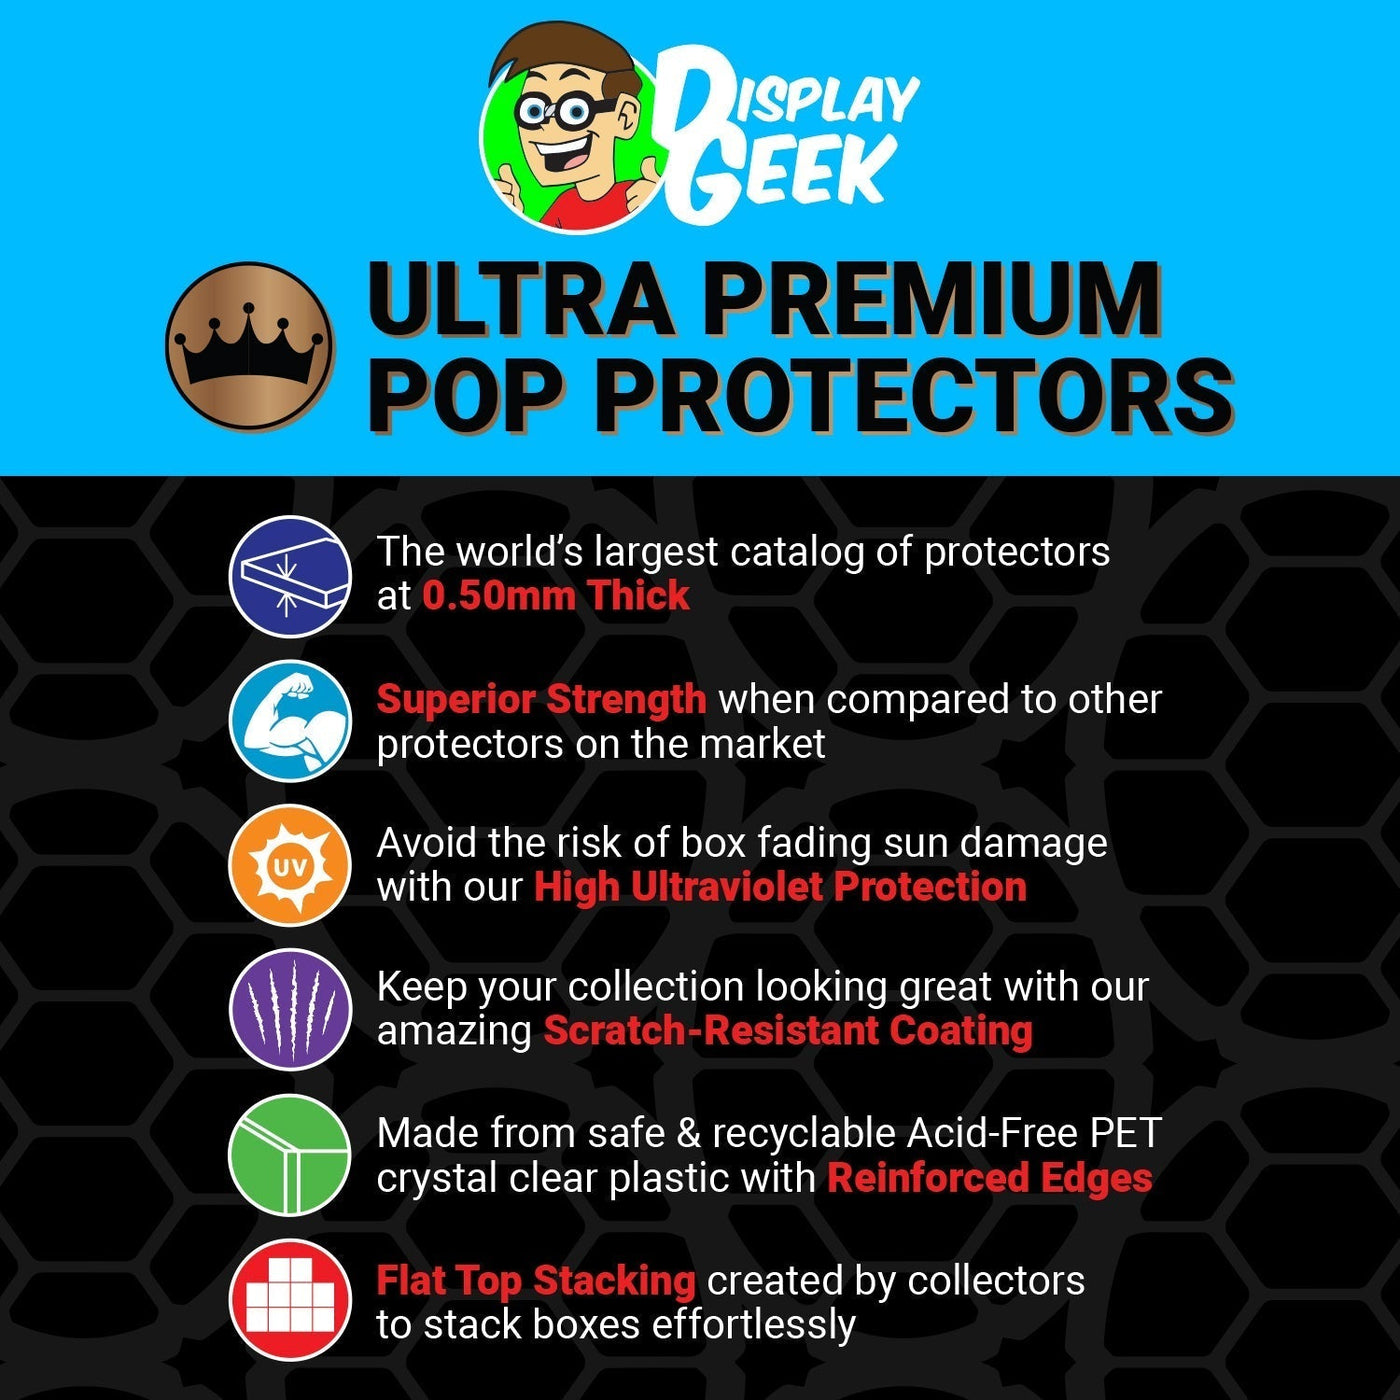 Pop Protector for Vynl 2 Pack Freddy Funko Funko on The Protector Guide App by Display Geek